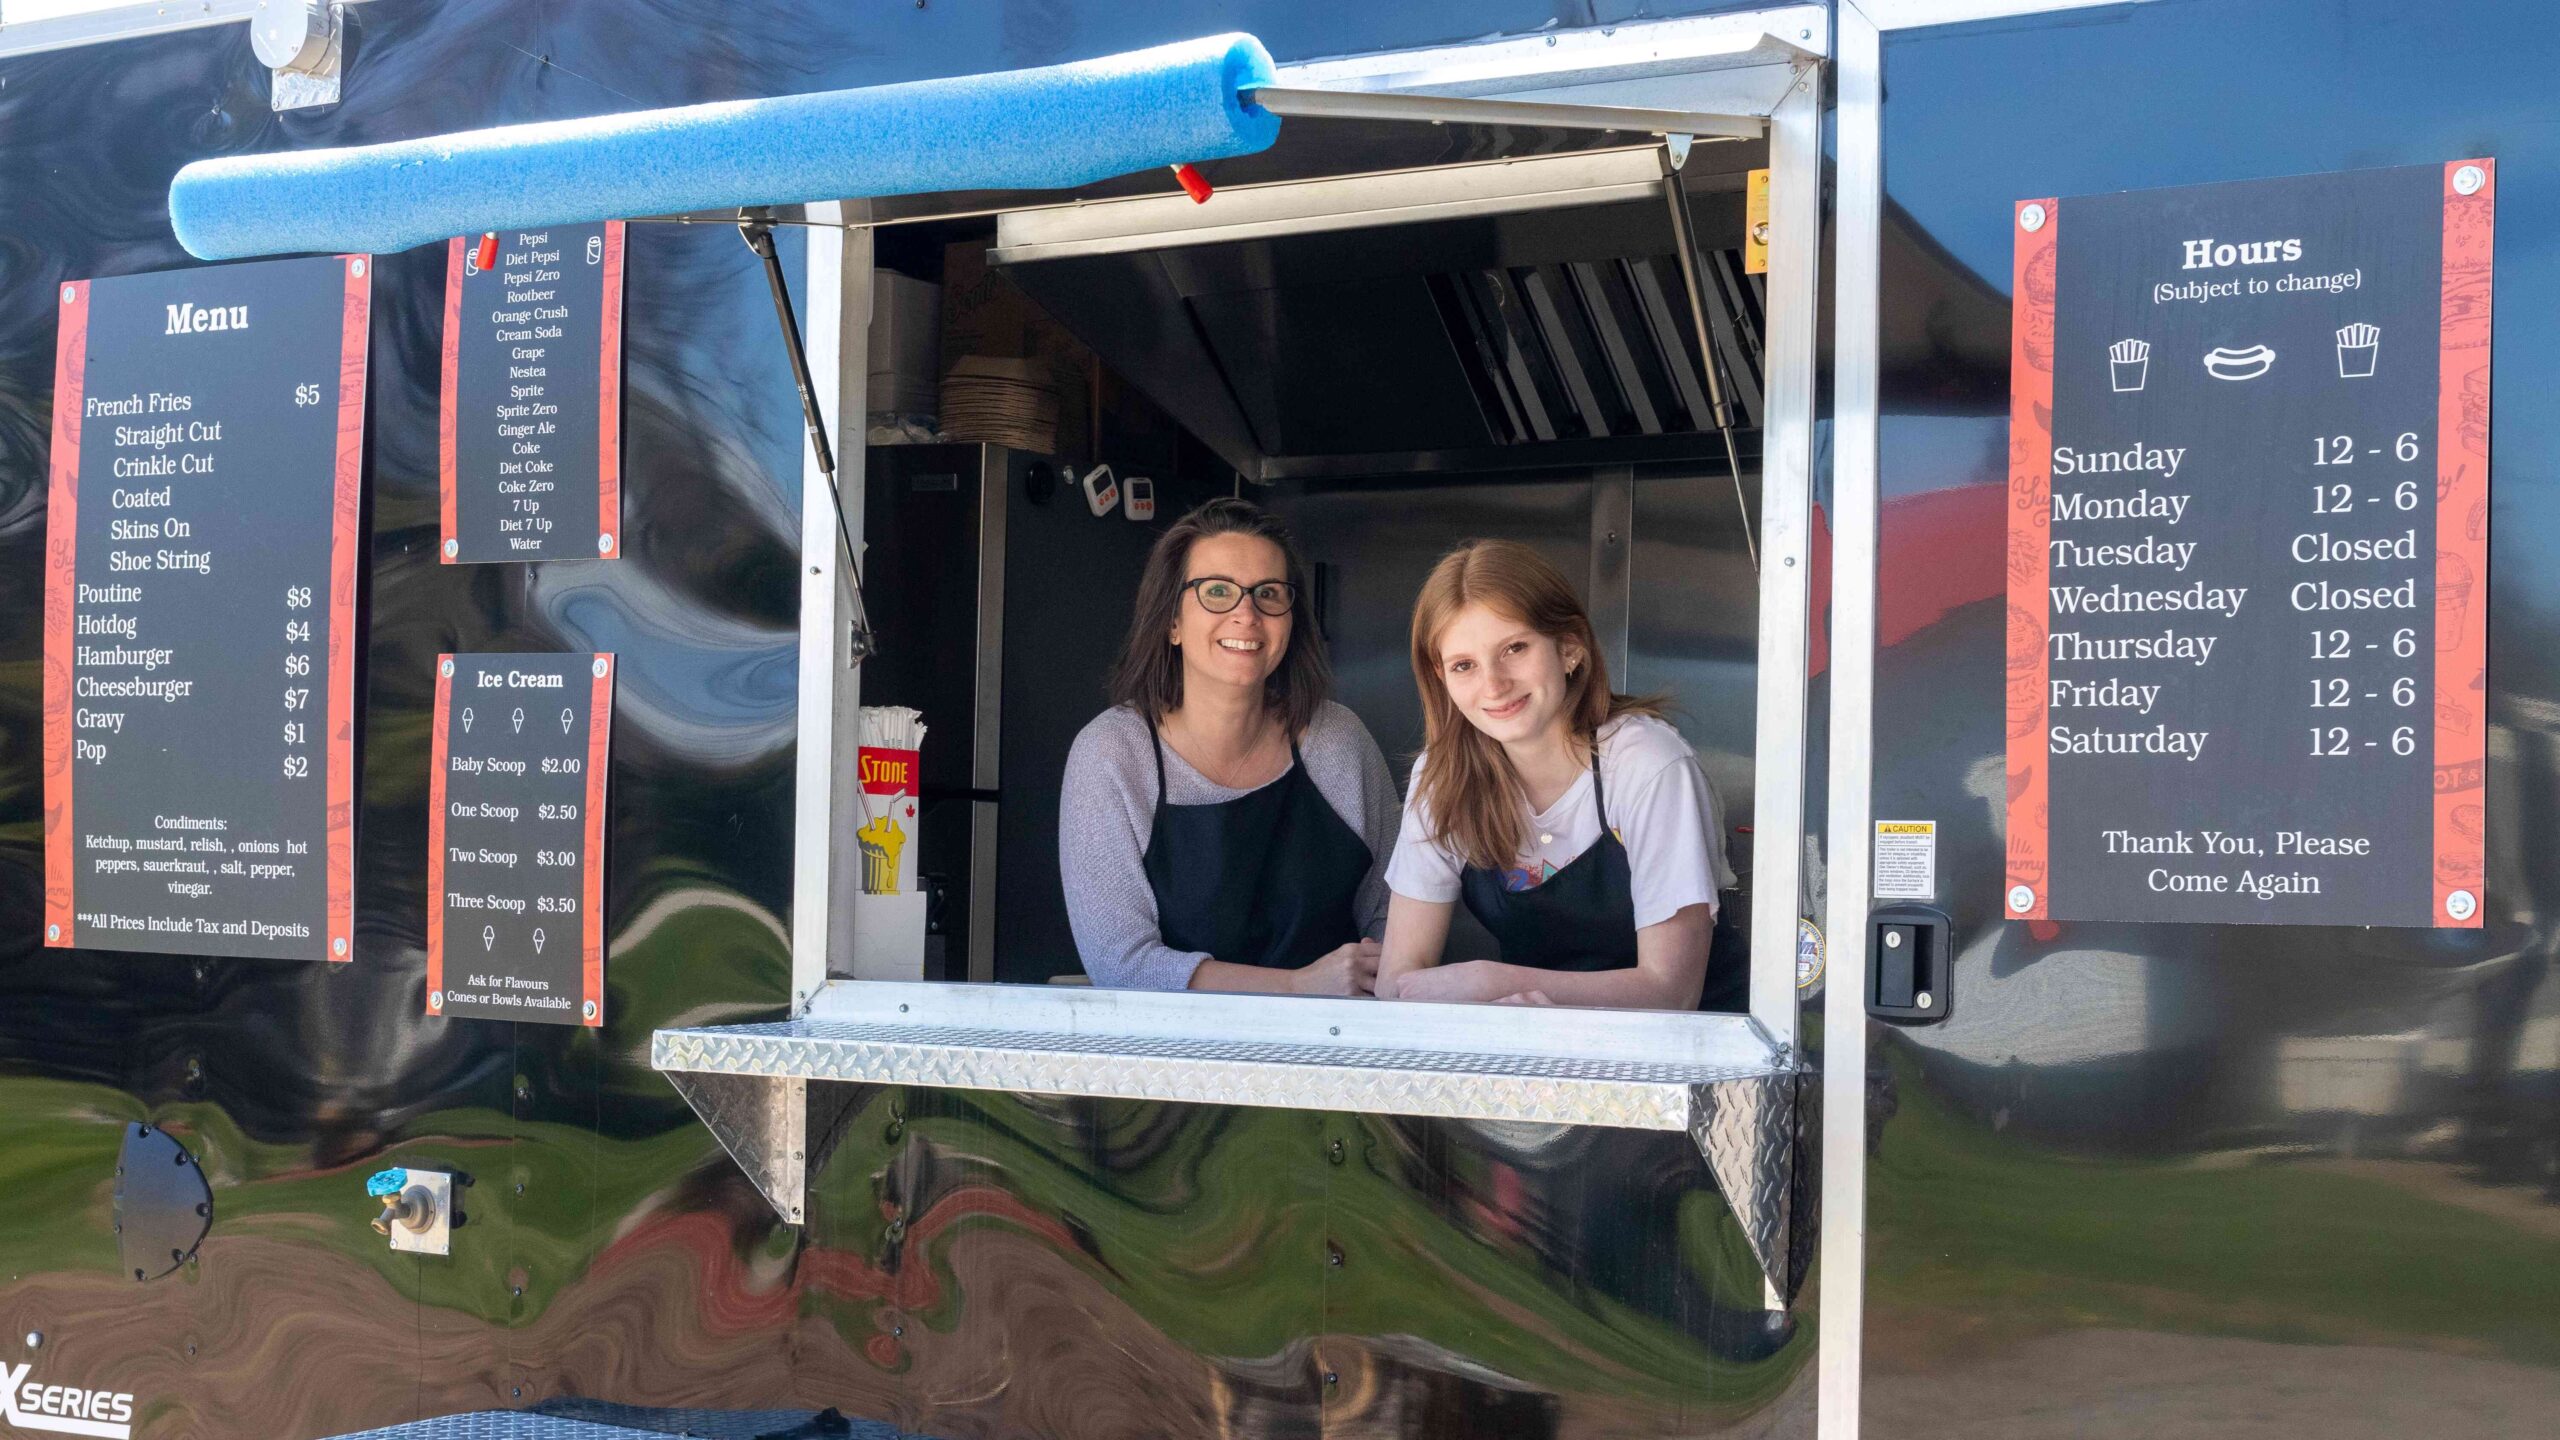 Two women smile from the service window of a black food truck.